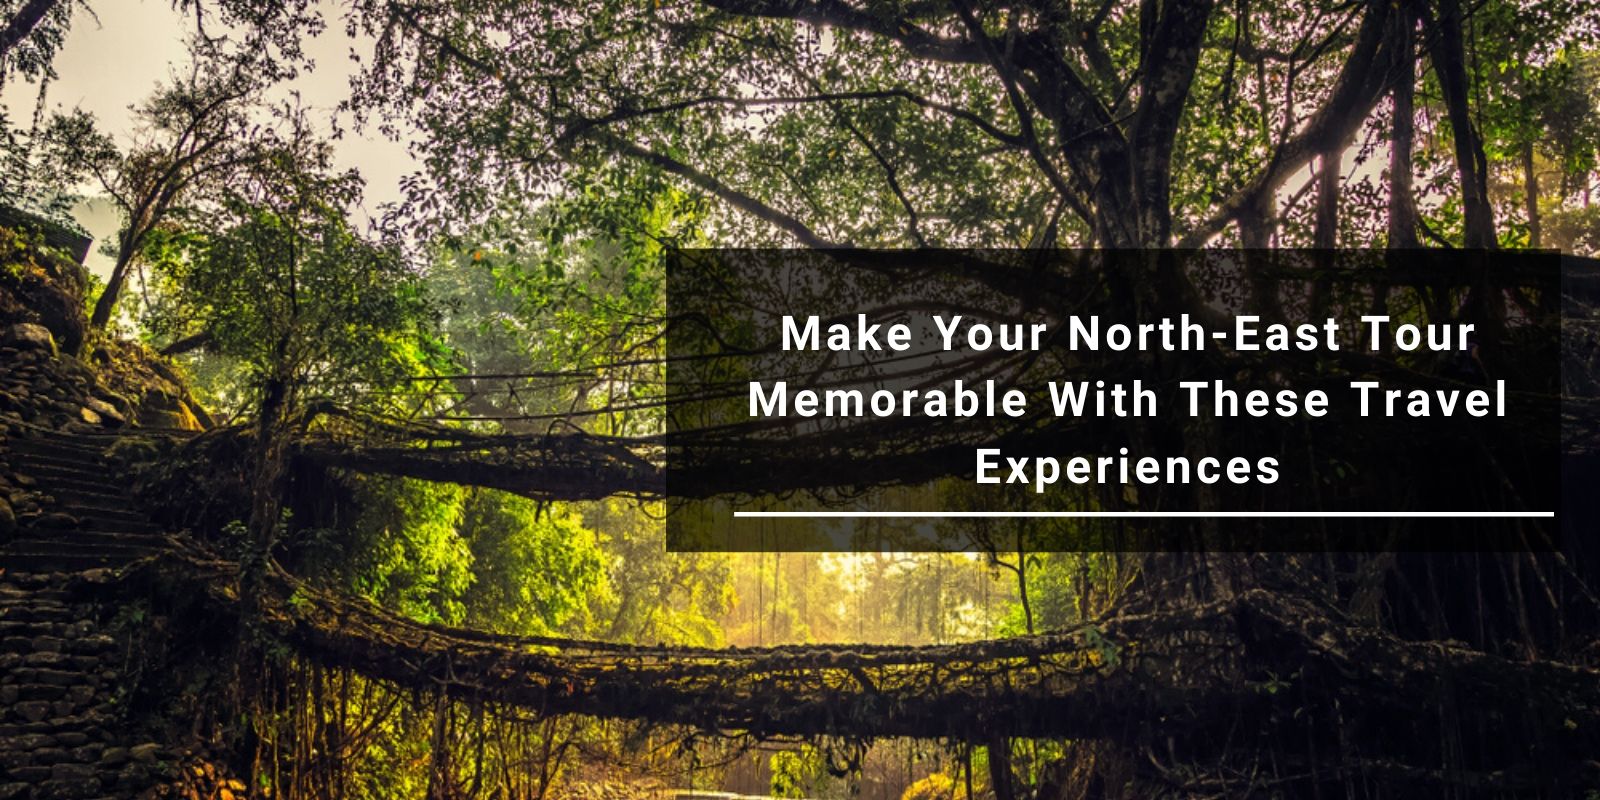 Make Your North-East Tour Memorable With These Travel Experiences